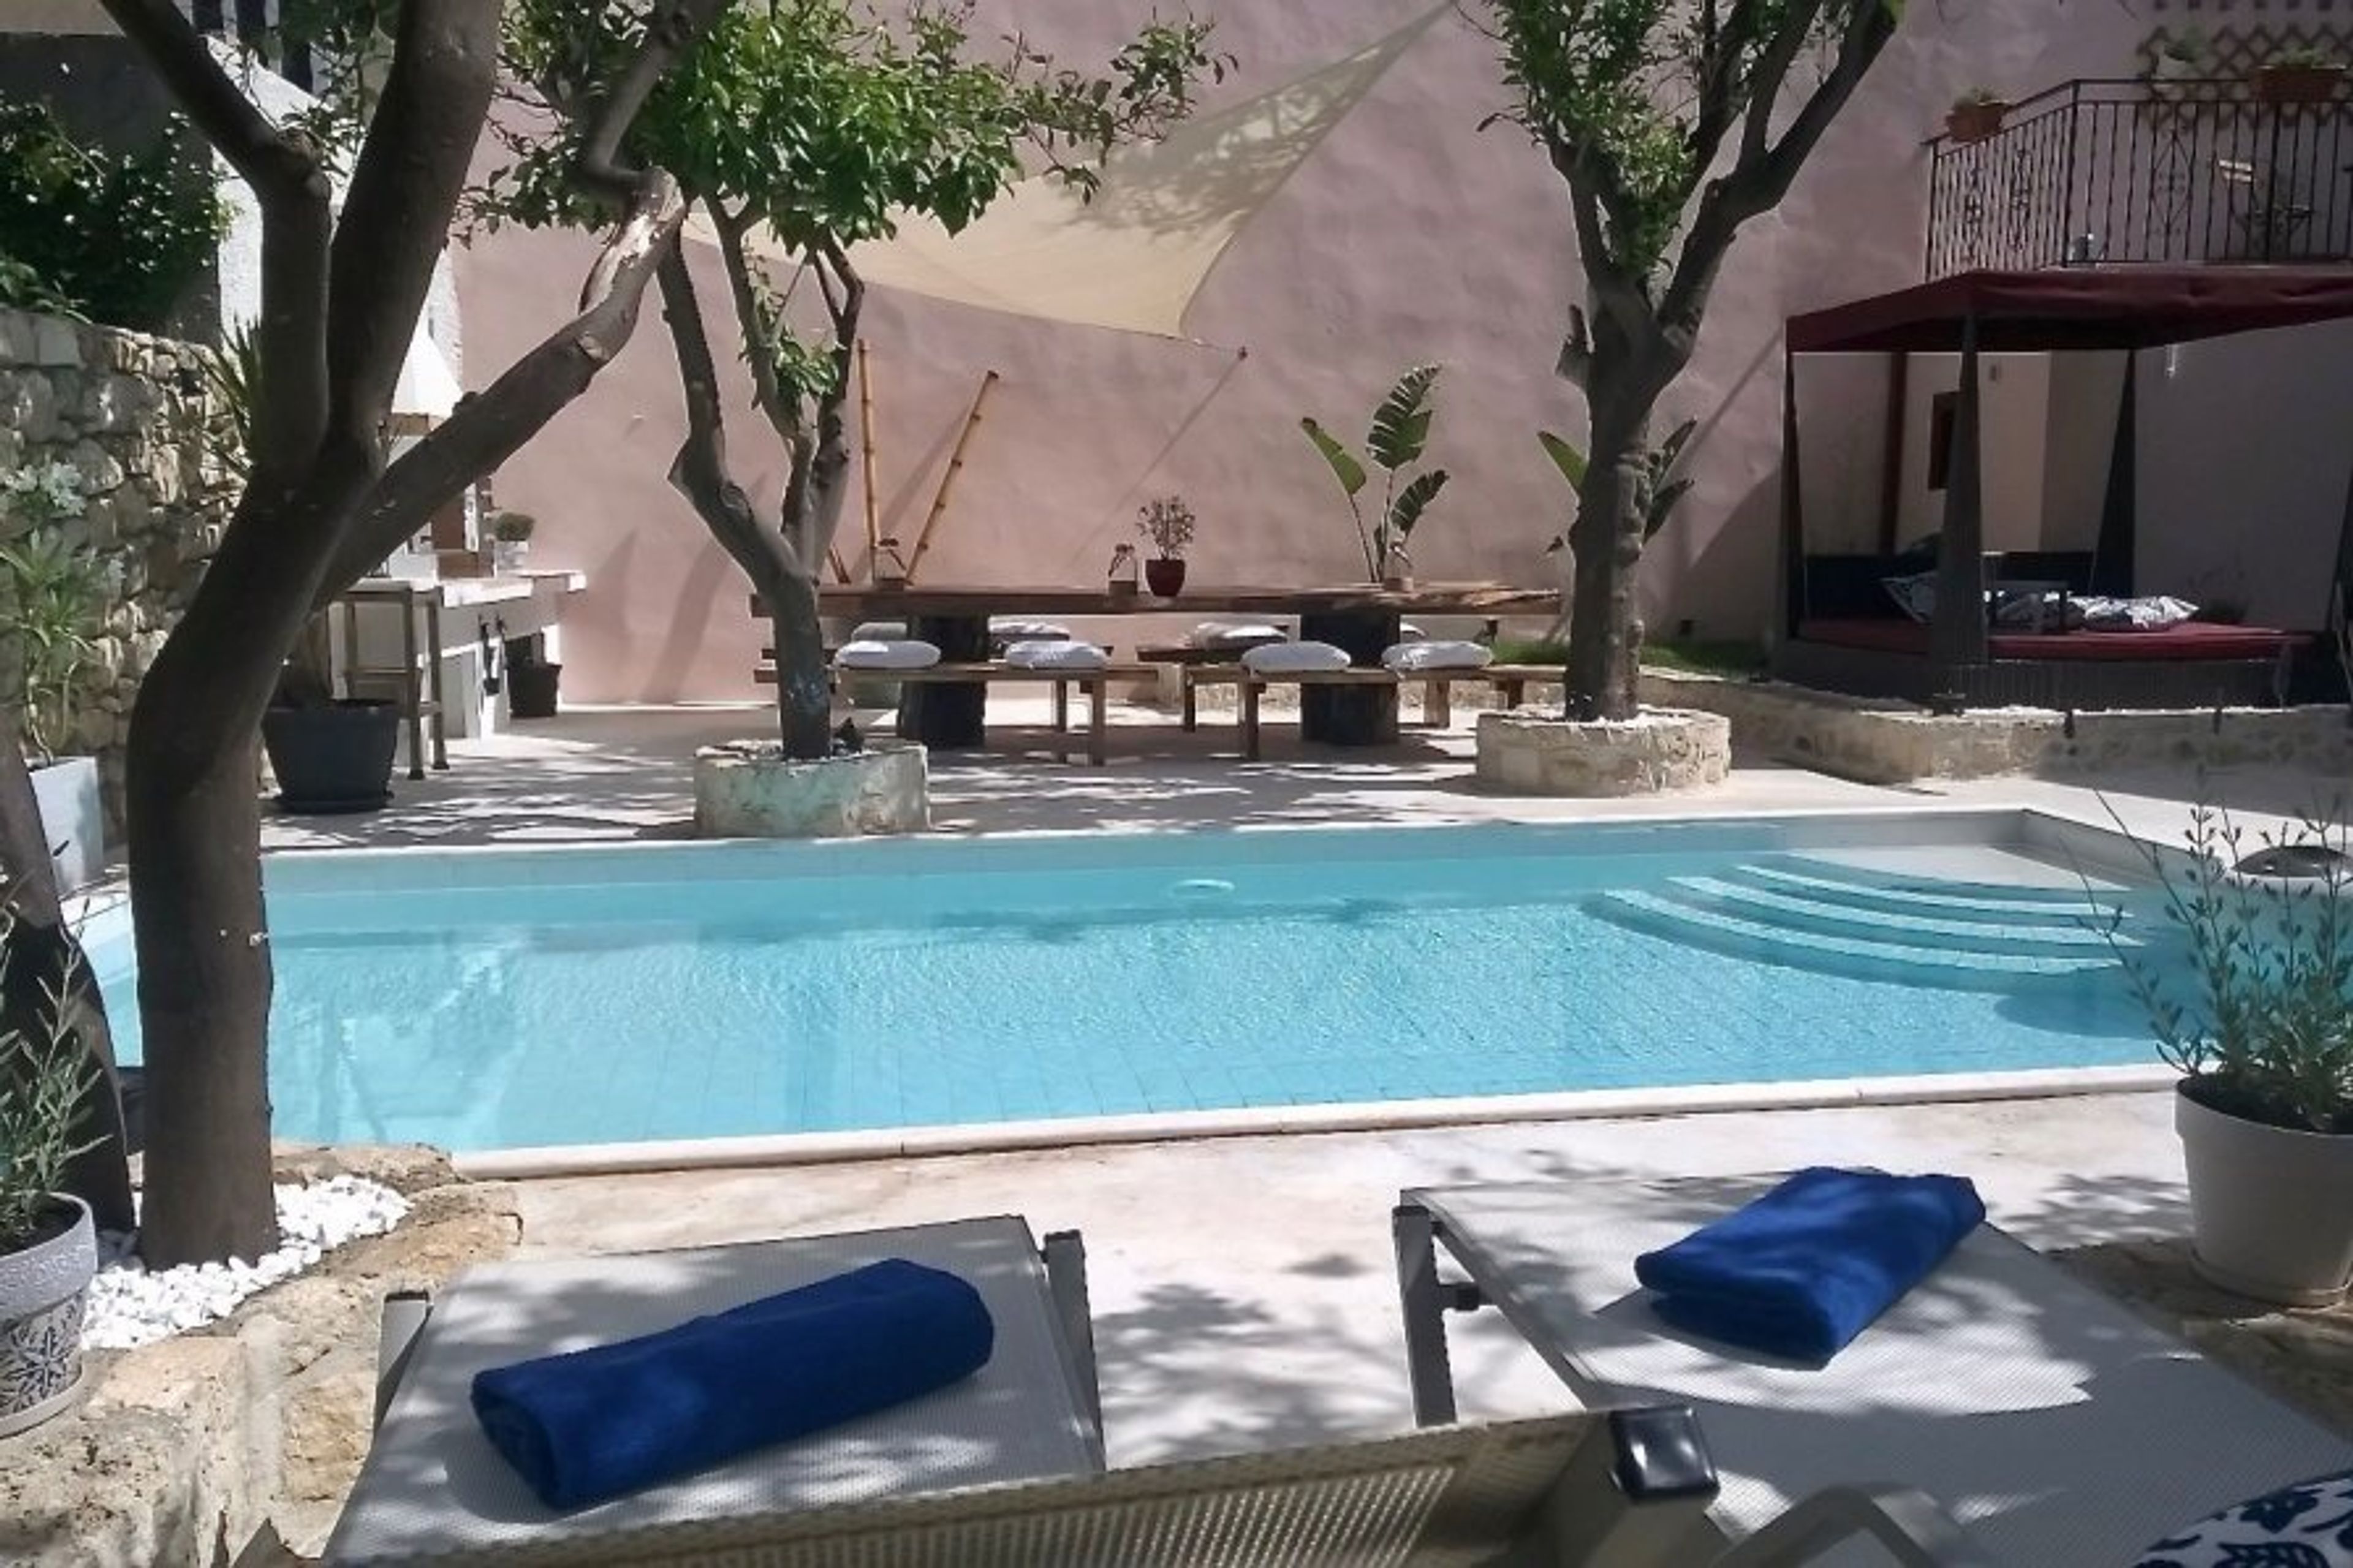 The Manor - Your private villa with pool in the heart of the Old Town